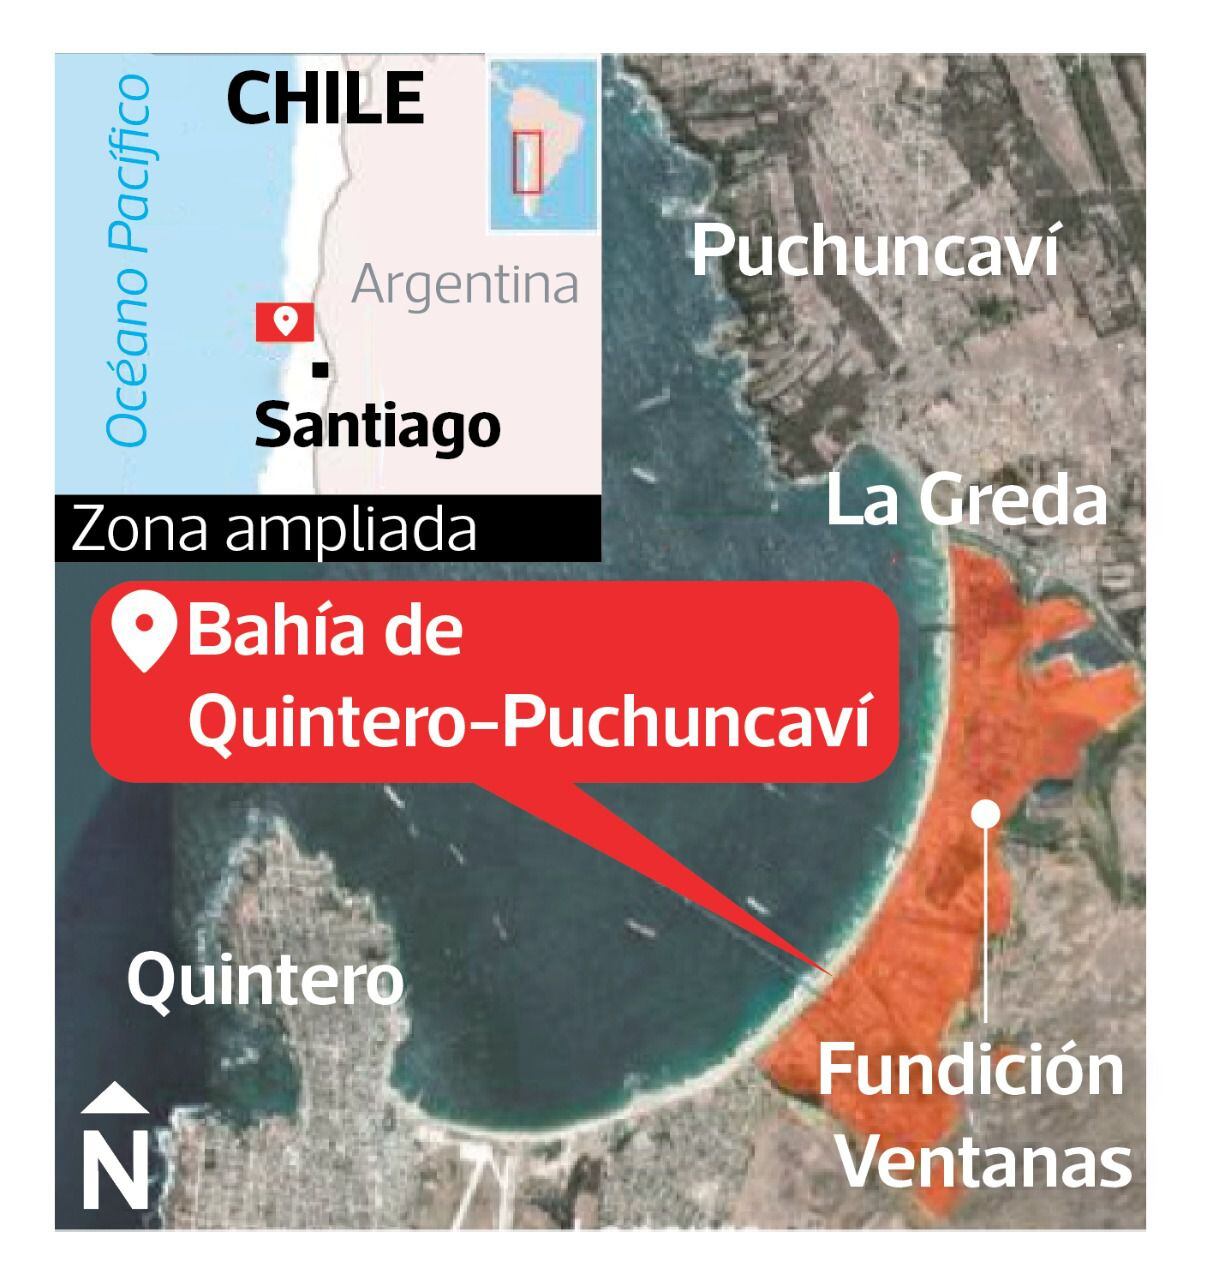 Infographic showing the place in Valparíso that suffers from pollution.